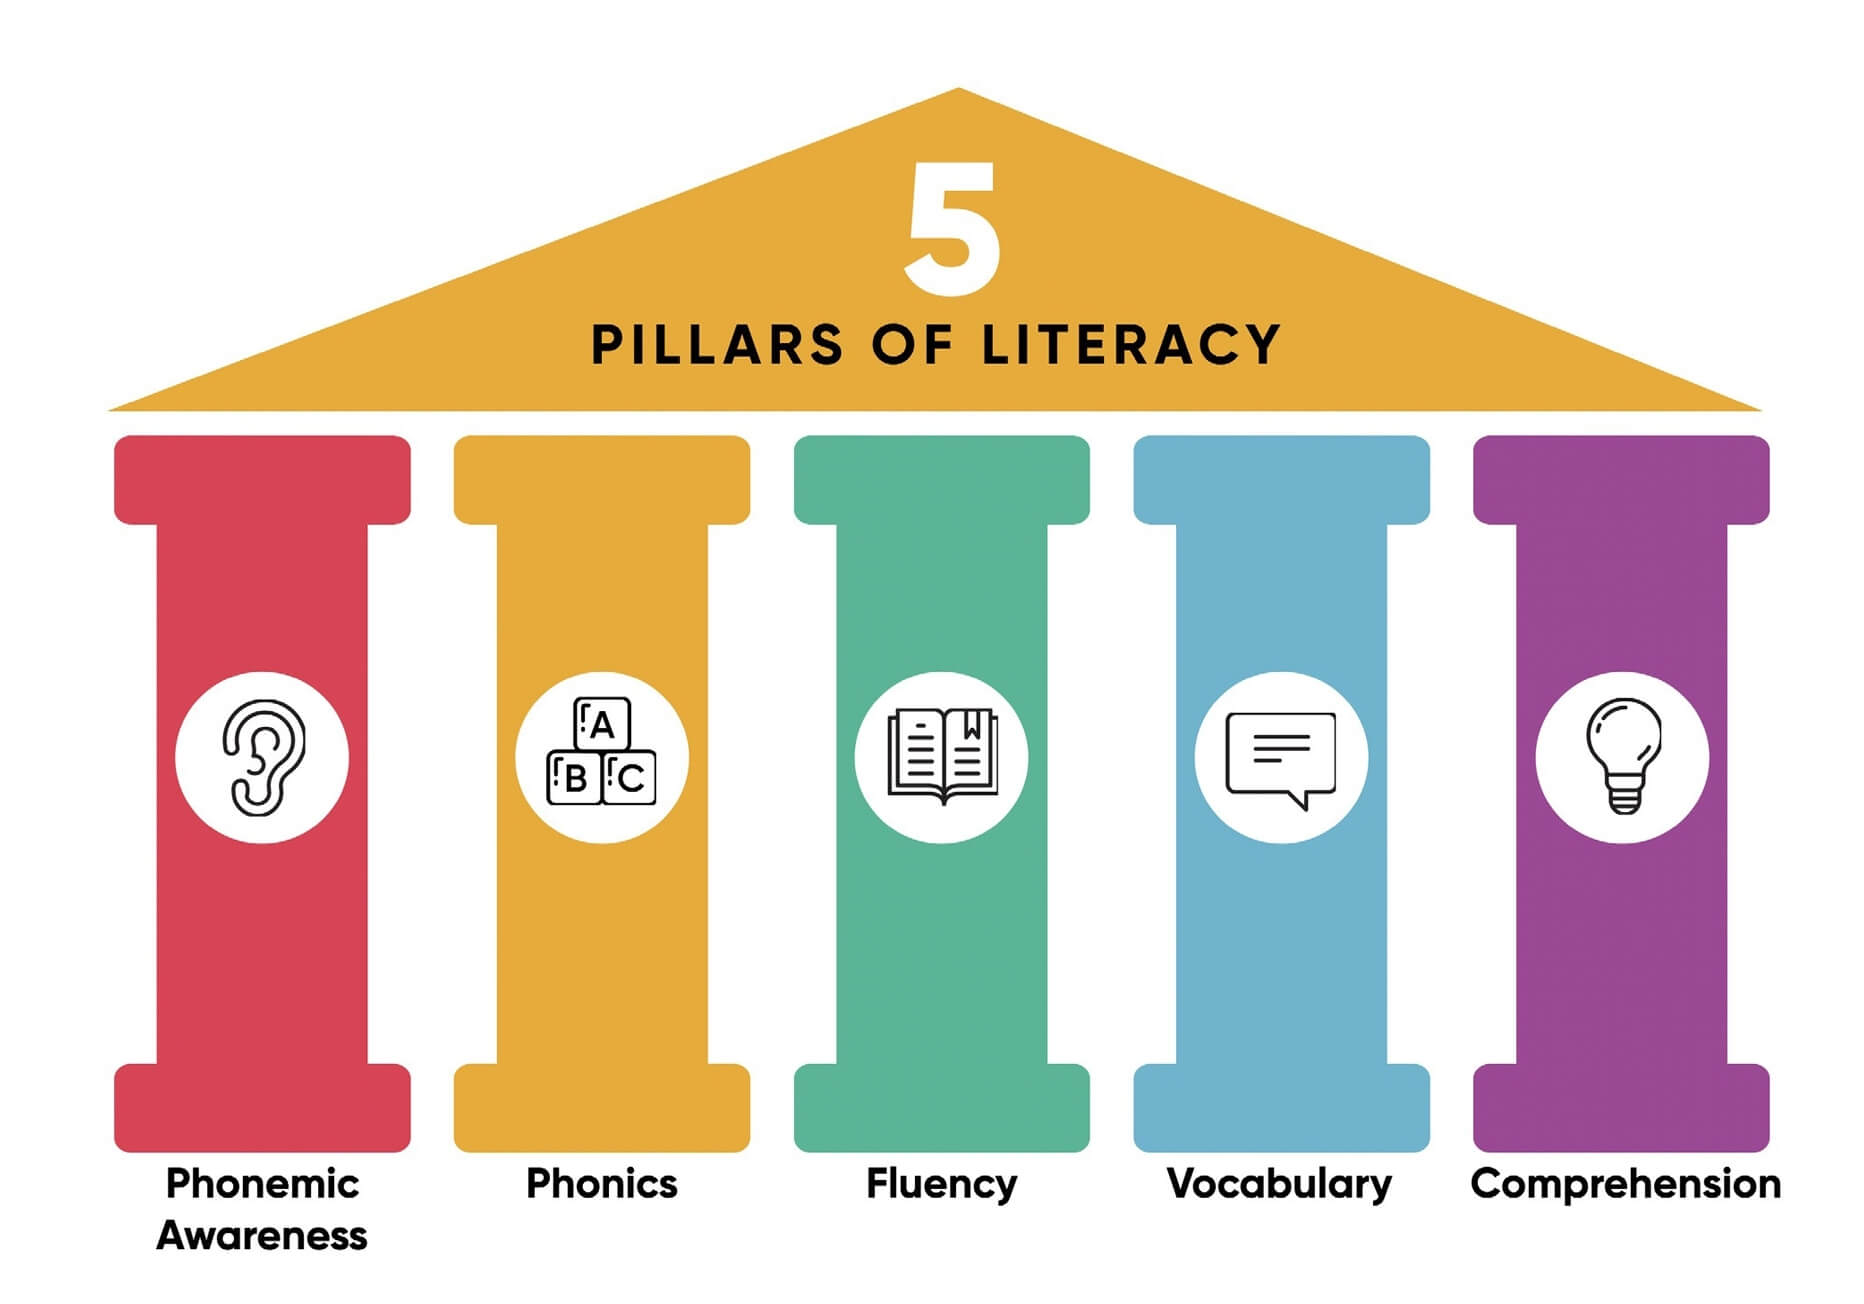 The 5 Pillars of literacy include Phonemic Awareness, Phonics, Fluency, Vocabulary, and Comprehension